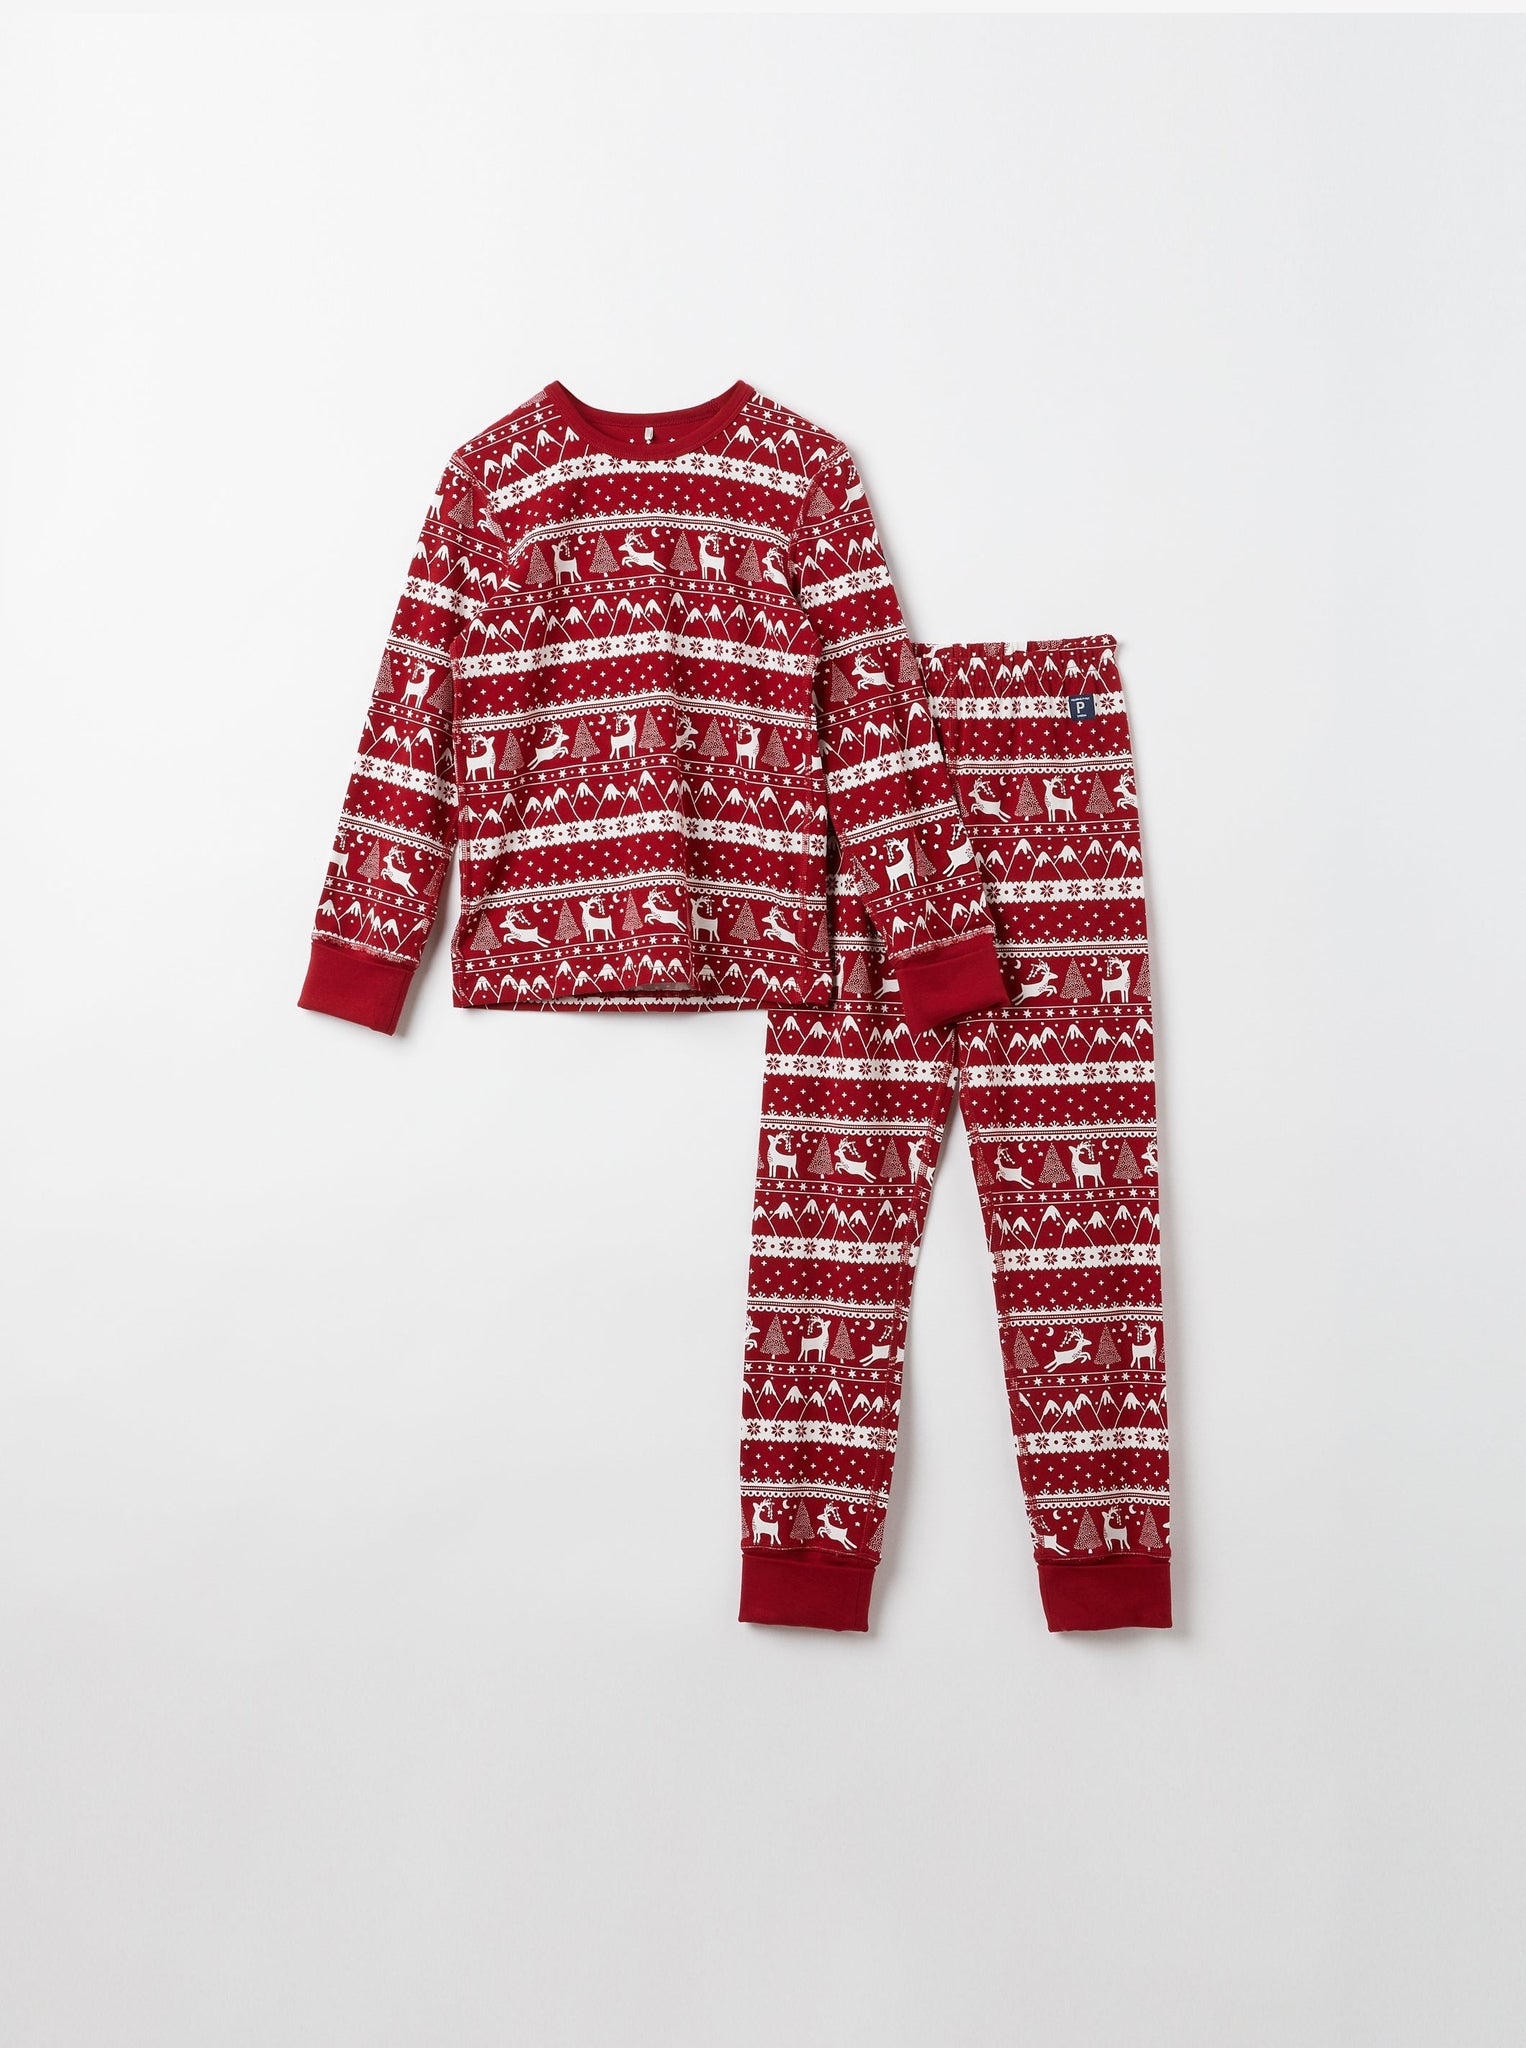 Organic Cotton Kids Christmas Pyjamas from the Polarn O. Pyret kidswear collection. The best ethical kids clothes